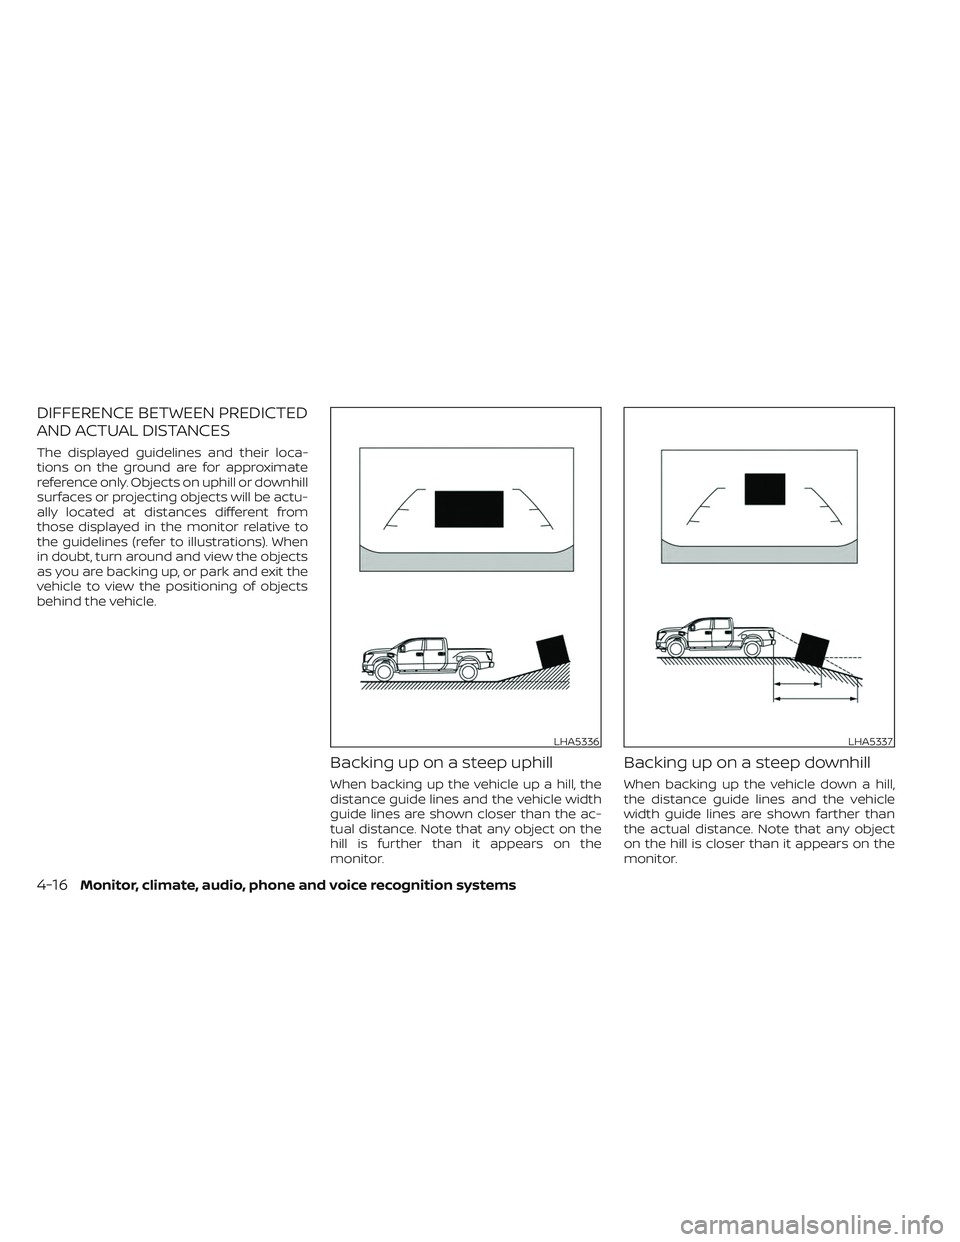 NISSAN TITAN 2022  Owners Manual DIFFERENCE BETWEEN PREDICTED
AND ACTUAL DISTANCES
The displayed guidelines and their loca-
tions on the ground are for approximate
reference only. Objects on uphill or downhill
surfaces or projecting 